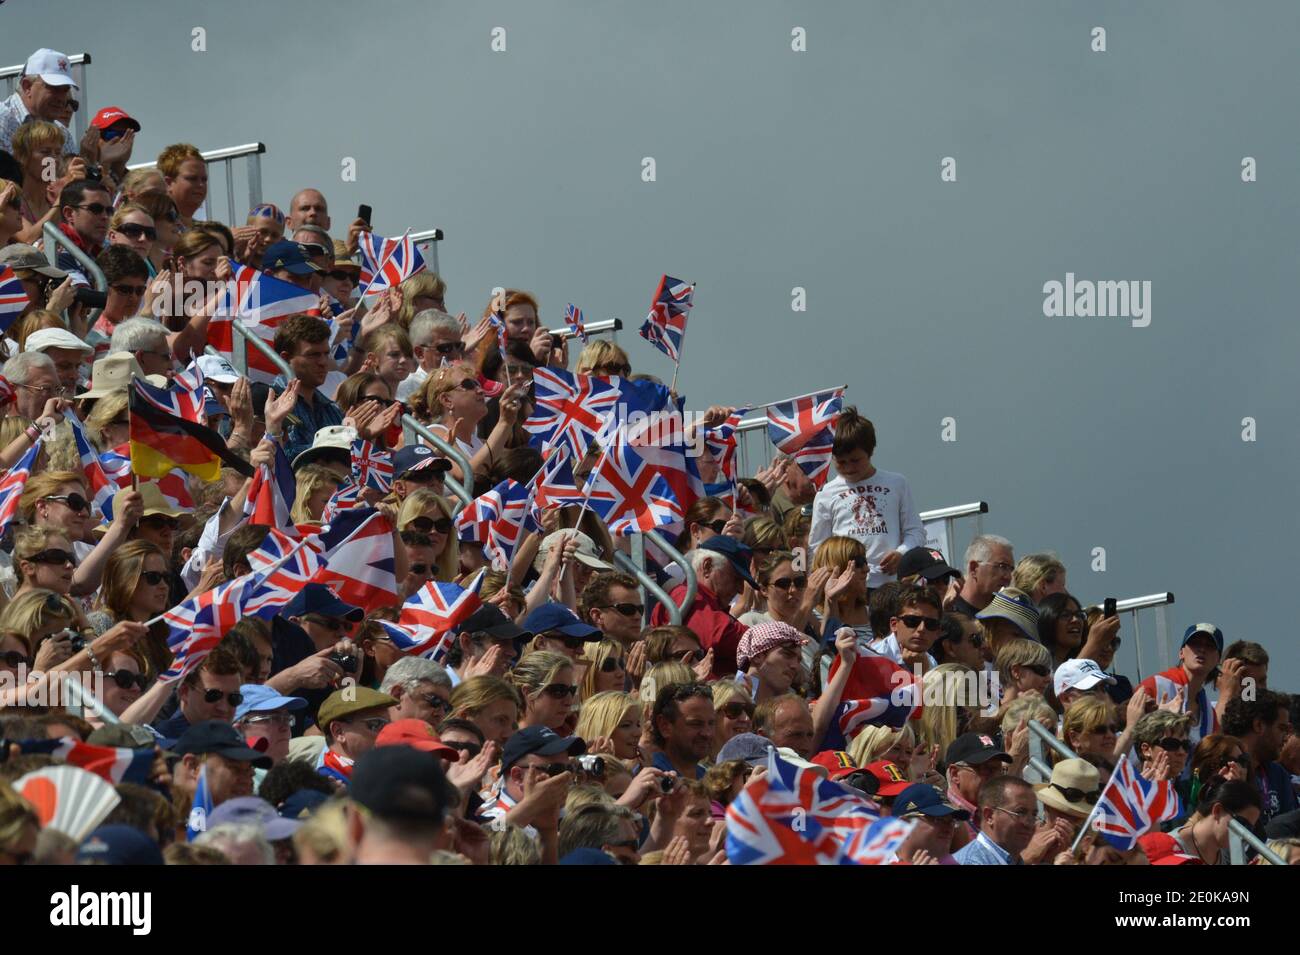 Atmosphere at the Individual Jumping Equestrian Final at Greenwich Park during the London 2012 Olympics, in London, UK on August 8, 2012. Photo by Gouhier-Guibbaud-JMP/ABACAPRESS.COM Stock Photo